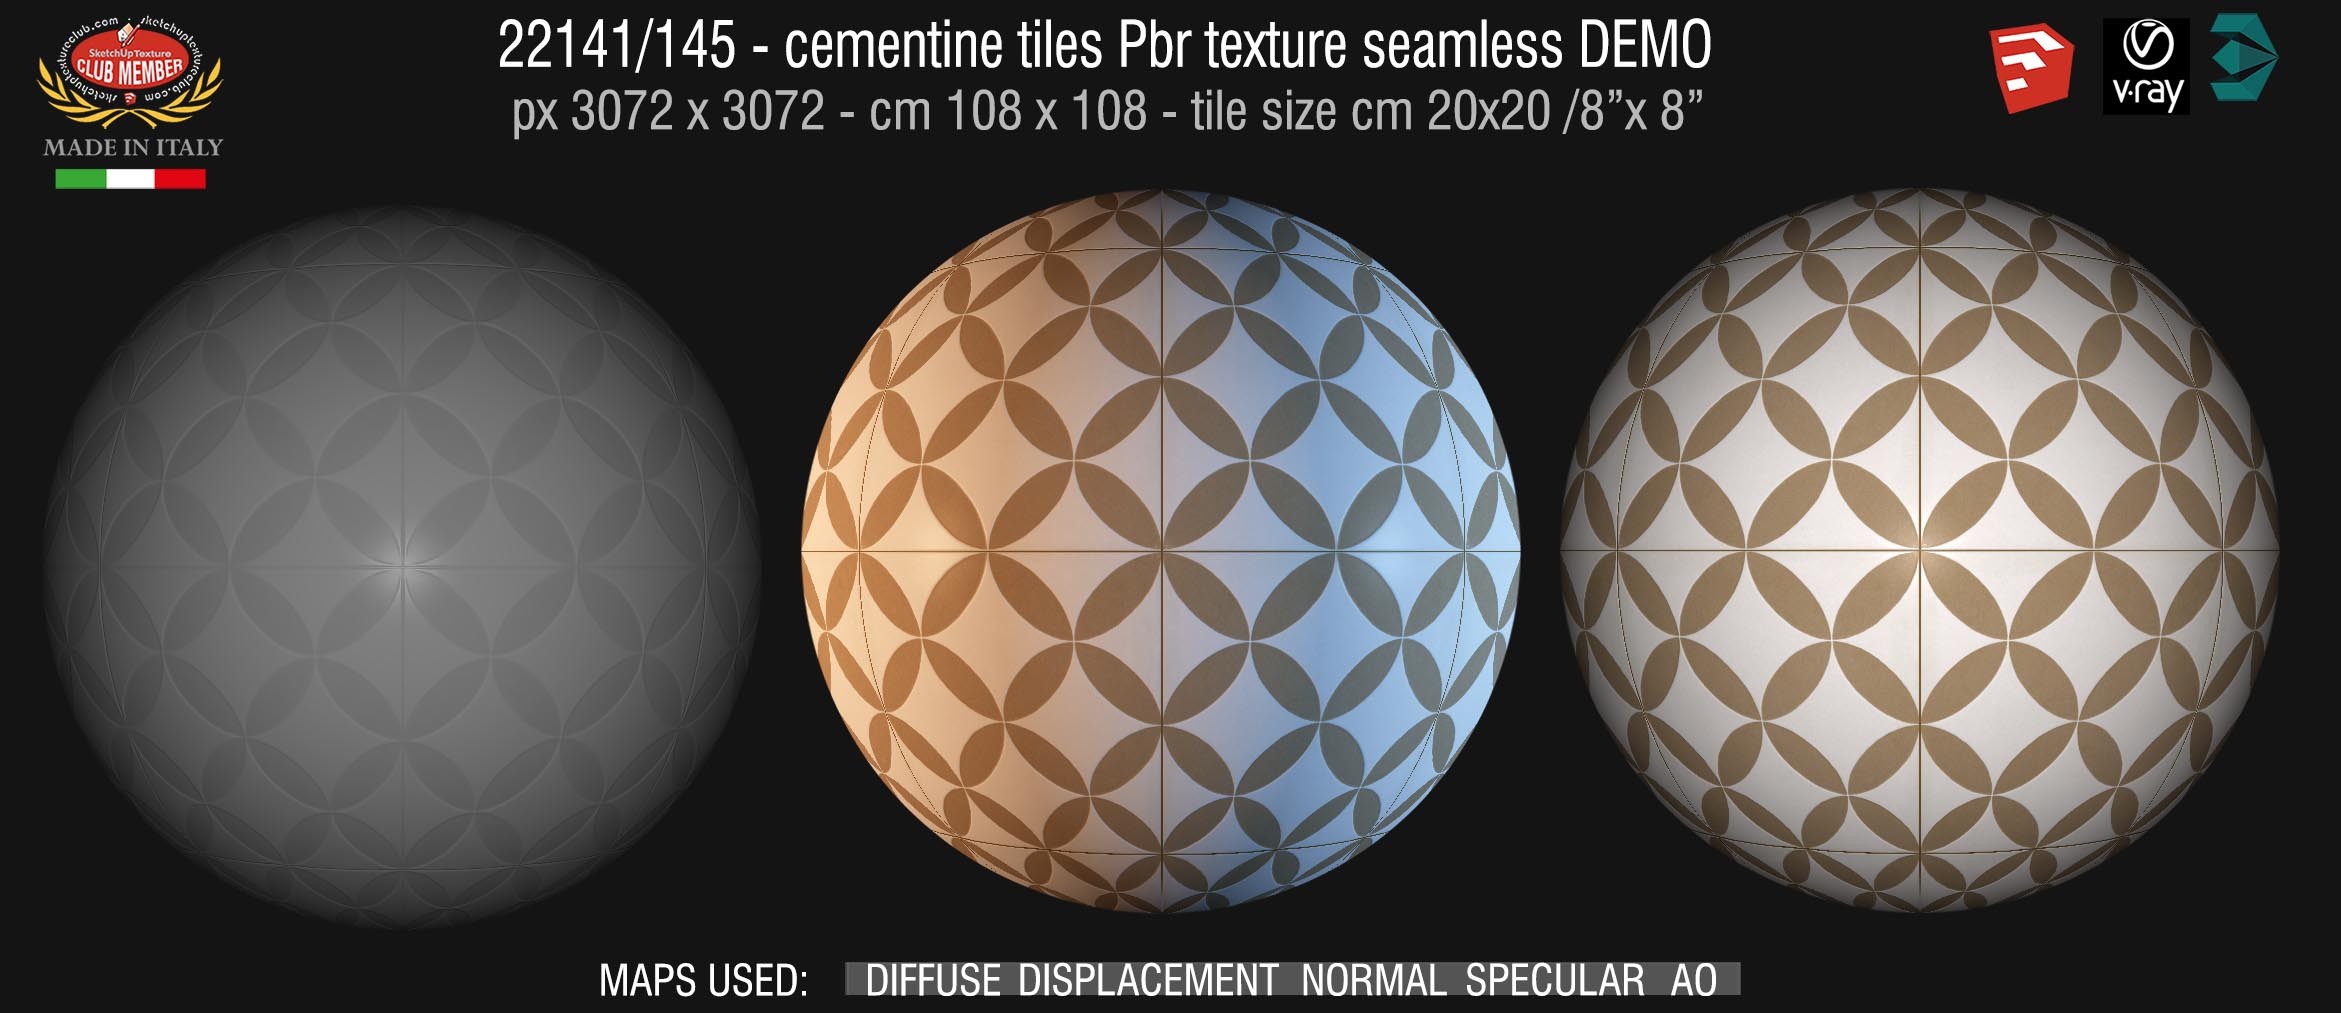 22141/145 cementine tiles Pbr texture seamless DEMO - Contrasti collection Tappeto 4 by RAGNO